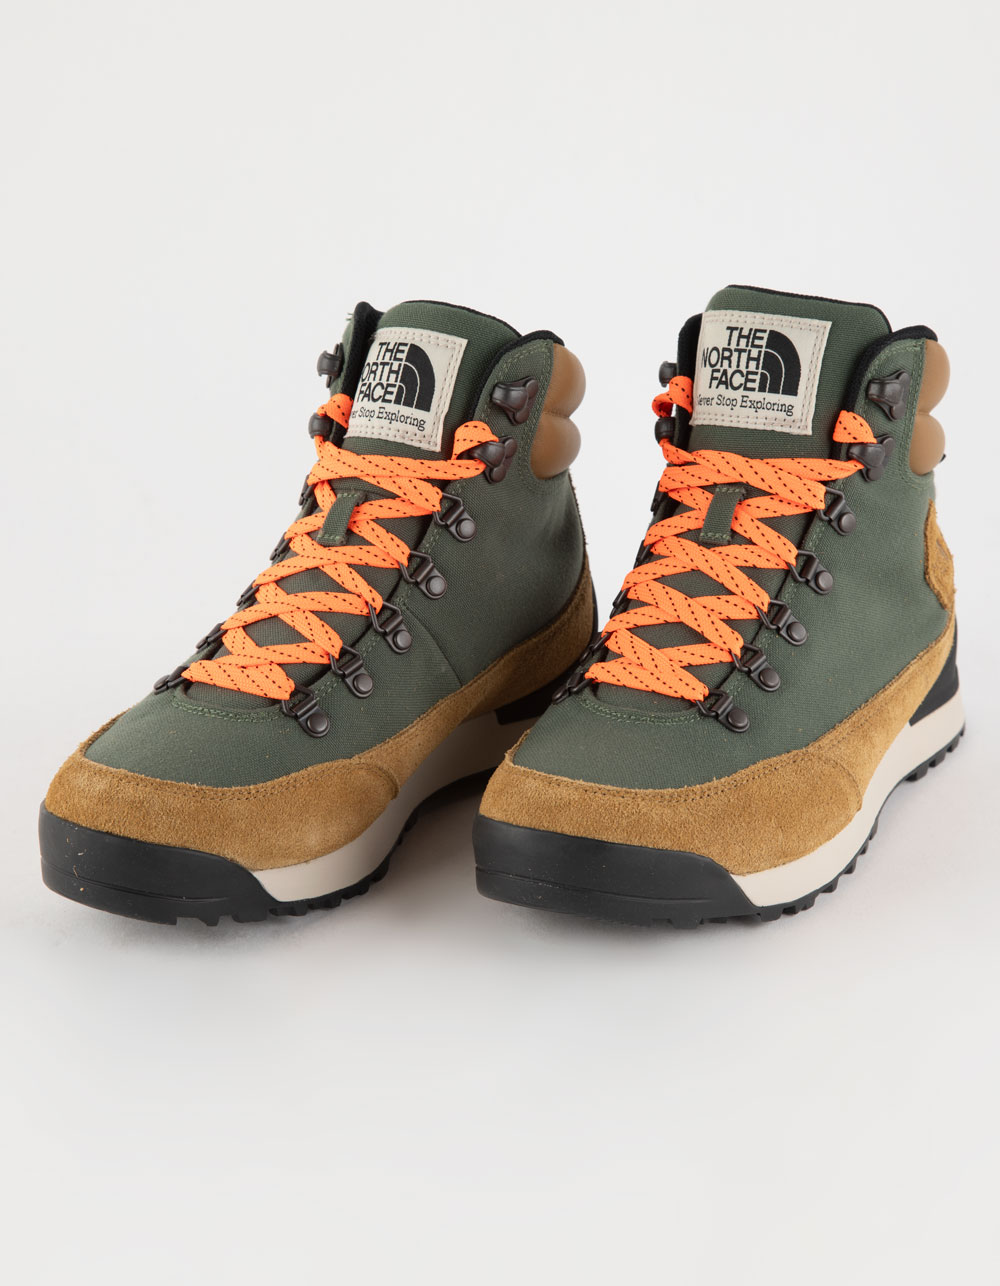 THE NORTH FACE Back-To-Berkeley IV Textile Waterproof Womens Boots ...